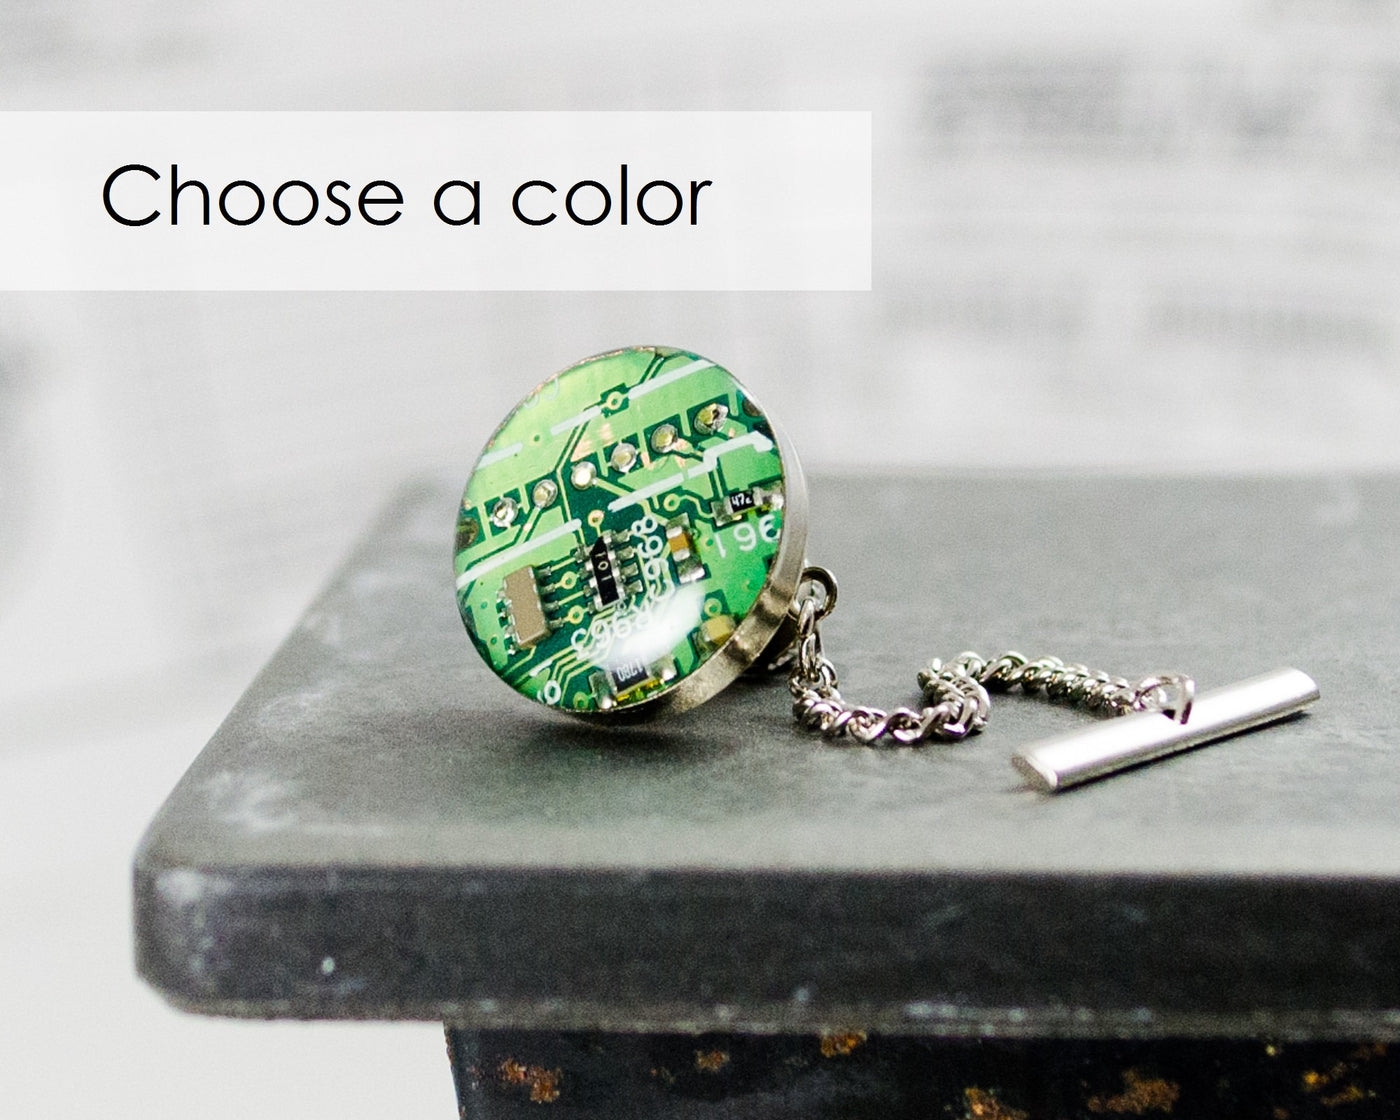 Circuit Board Tie Tack CHOOSE COLOR, Computer Engineer Gift, Geeky Tie Pin, Wearable Technology Gift, Lapel Pin, Electrical Engineer Gift